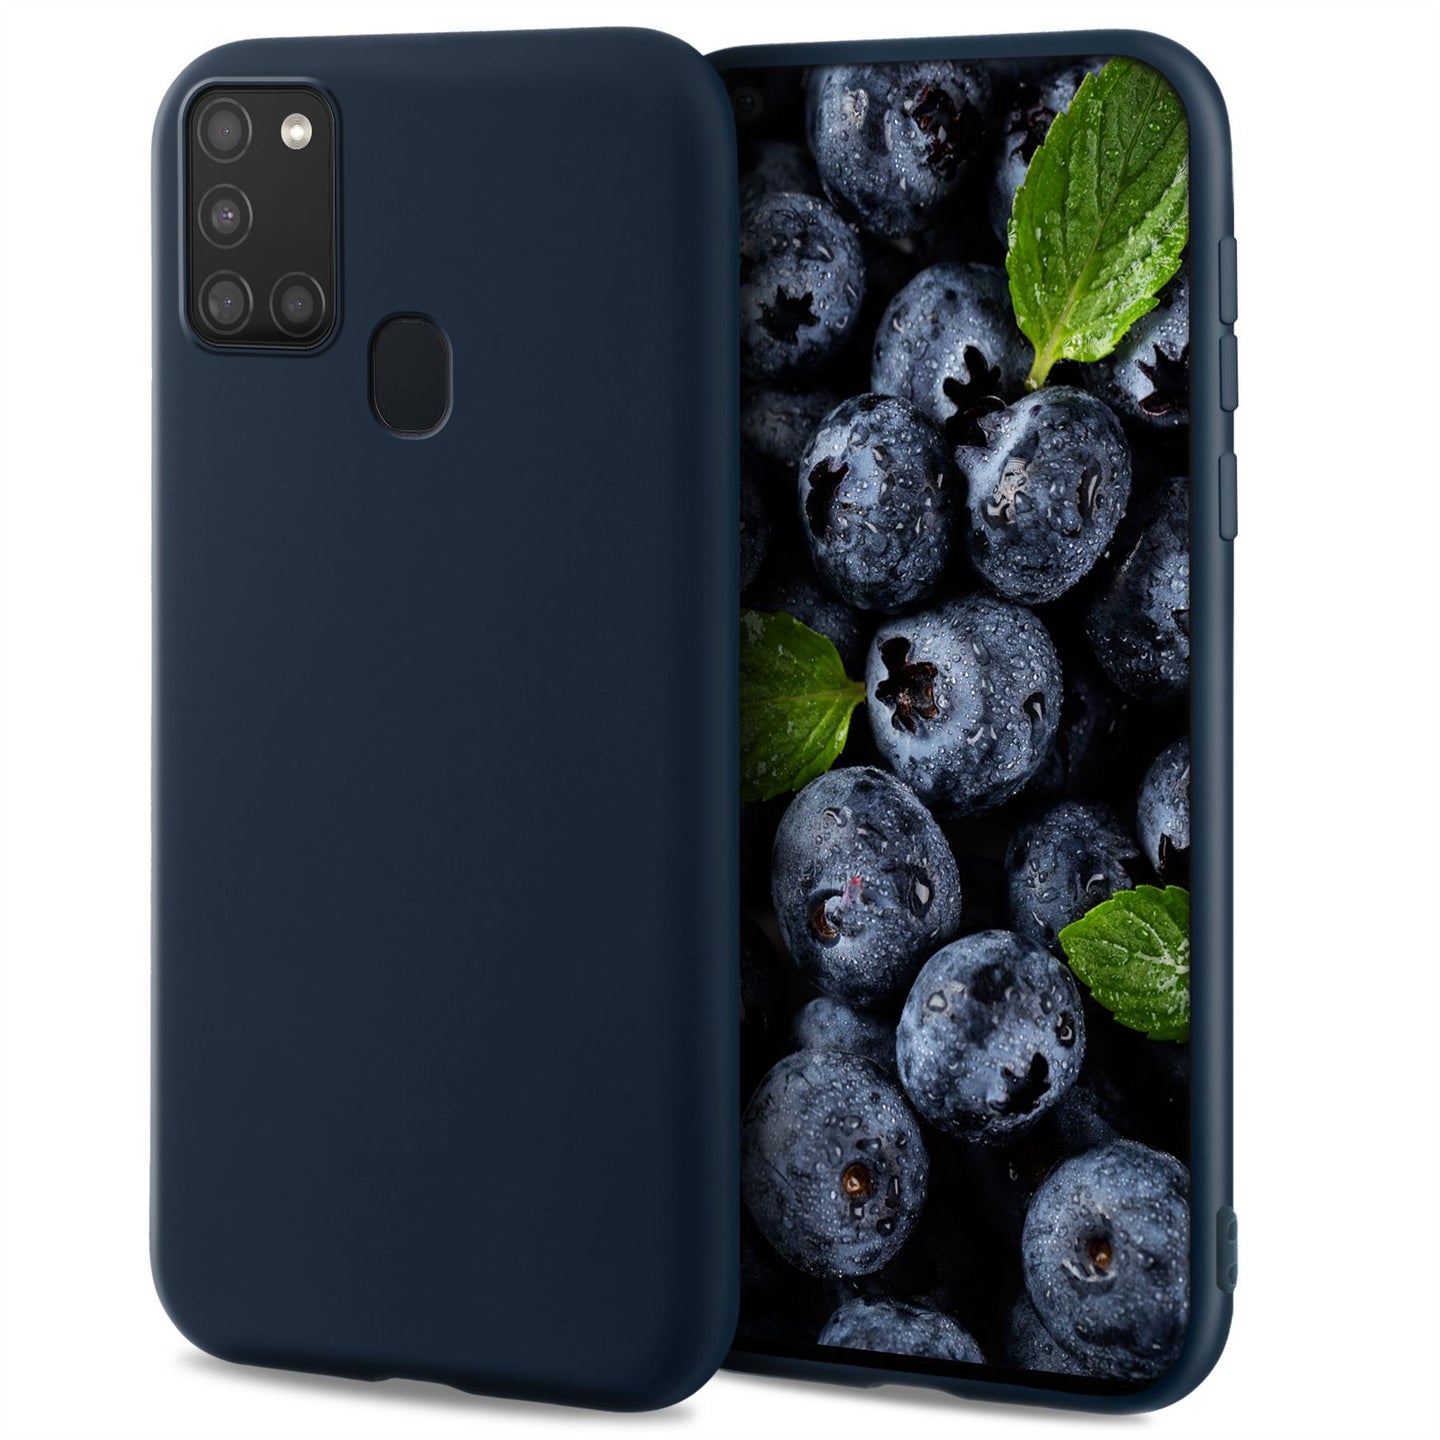 Moozy Lifestyle. Designed for Samsung A21s Case, Midnight Blue - Liquid Silicone Cover with Matte Finish and Soft Microfiber Lining